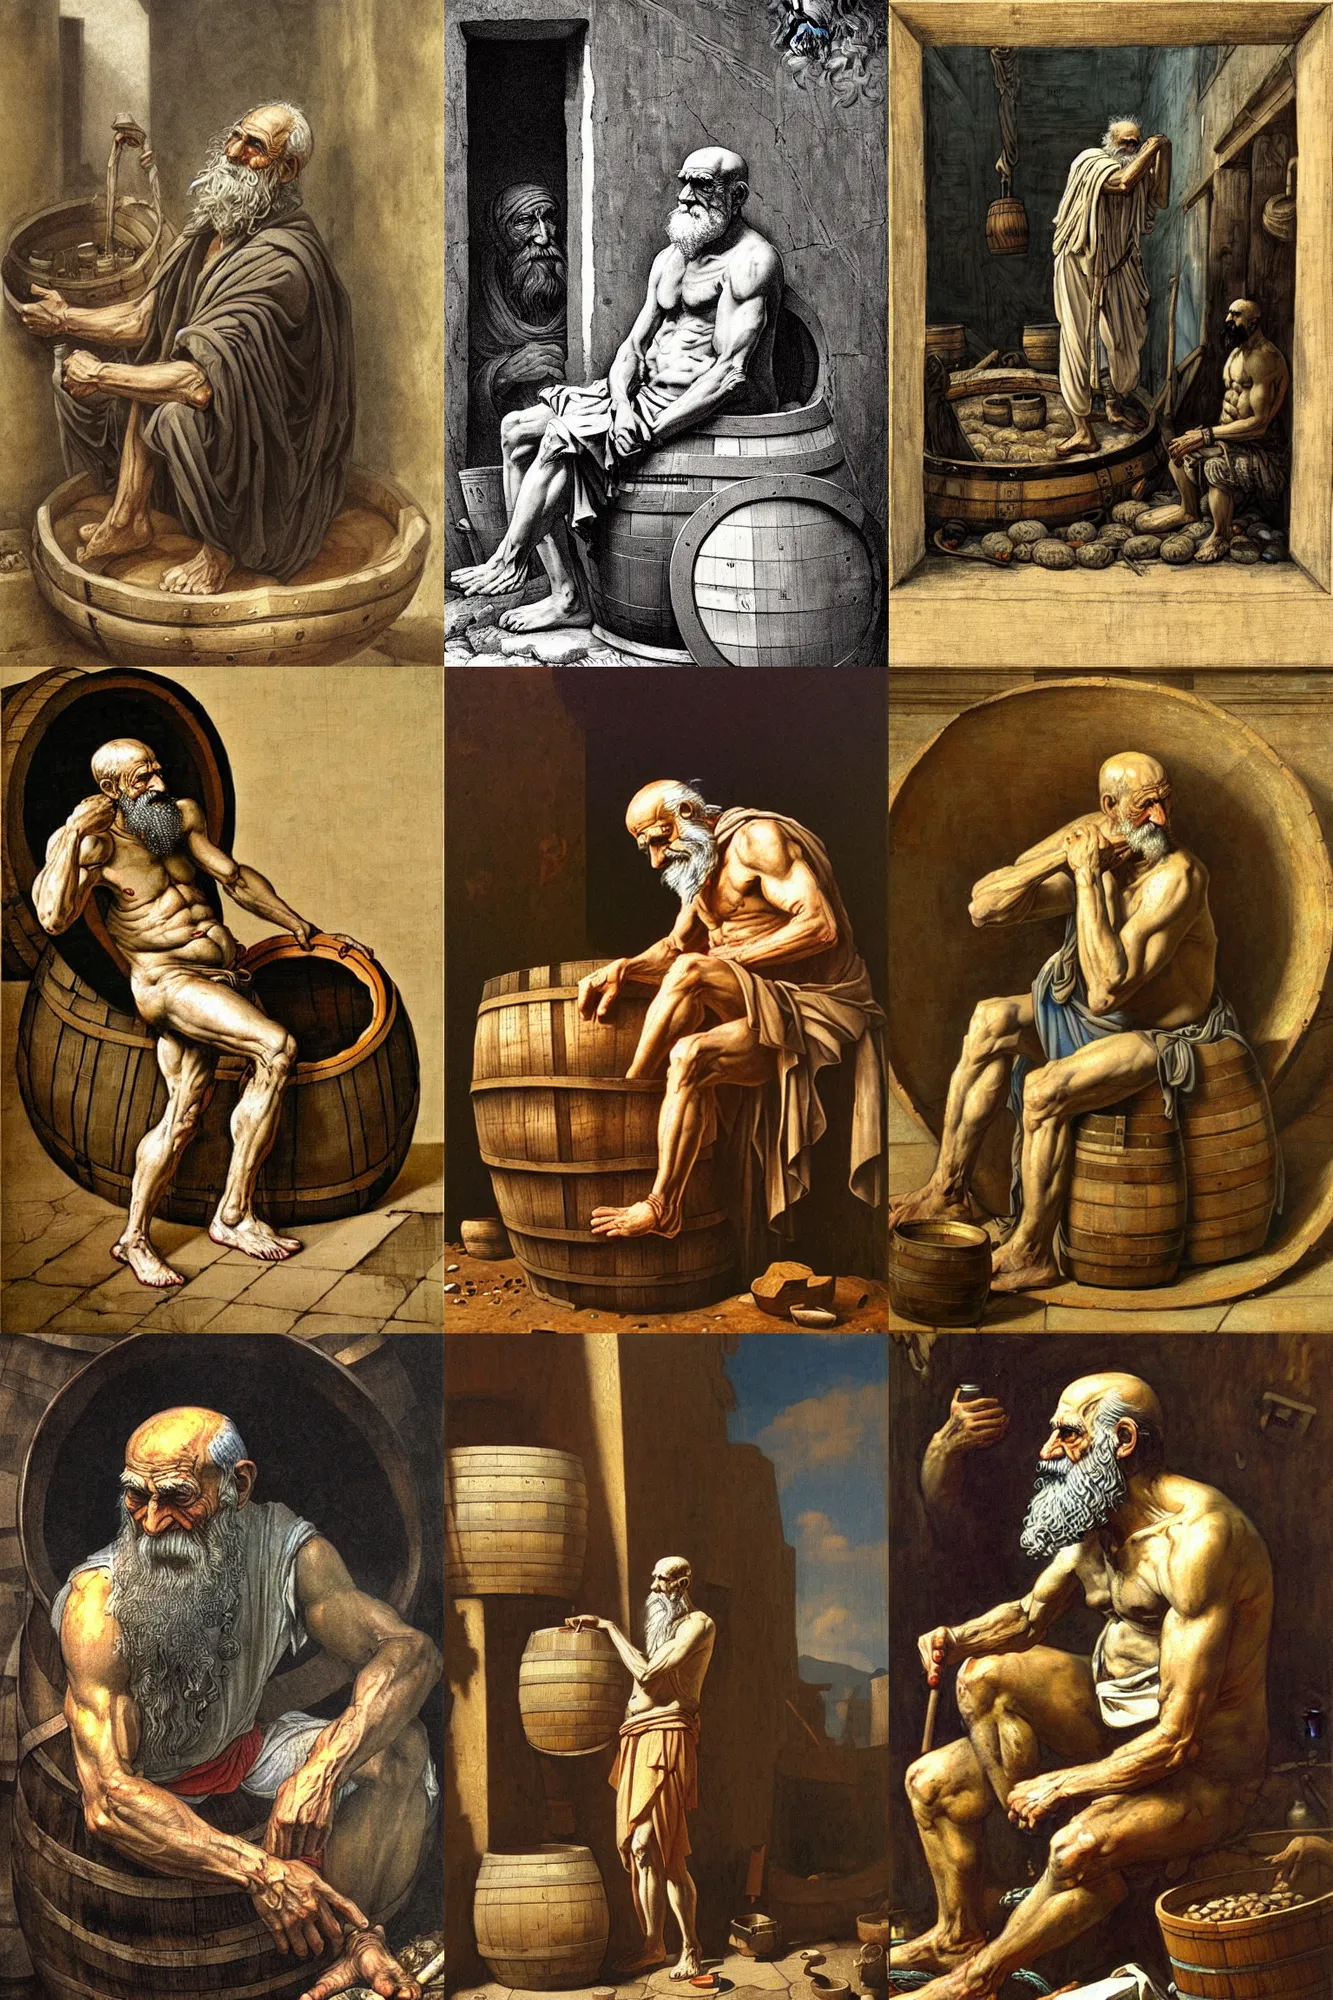 diogenes of sipone living in his barrel, looking for | Stable Diffusion ...